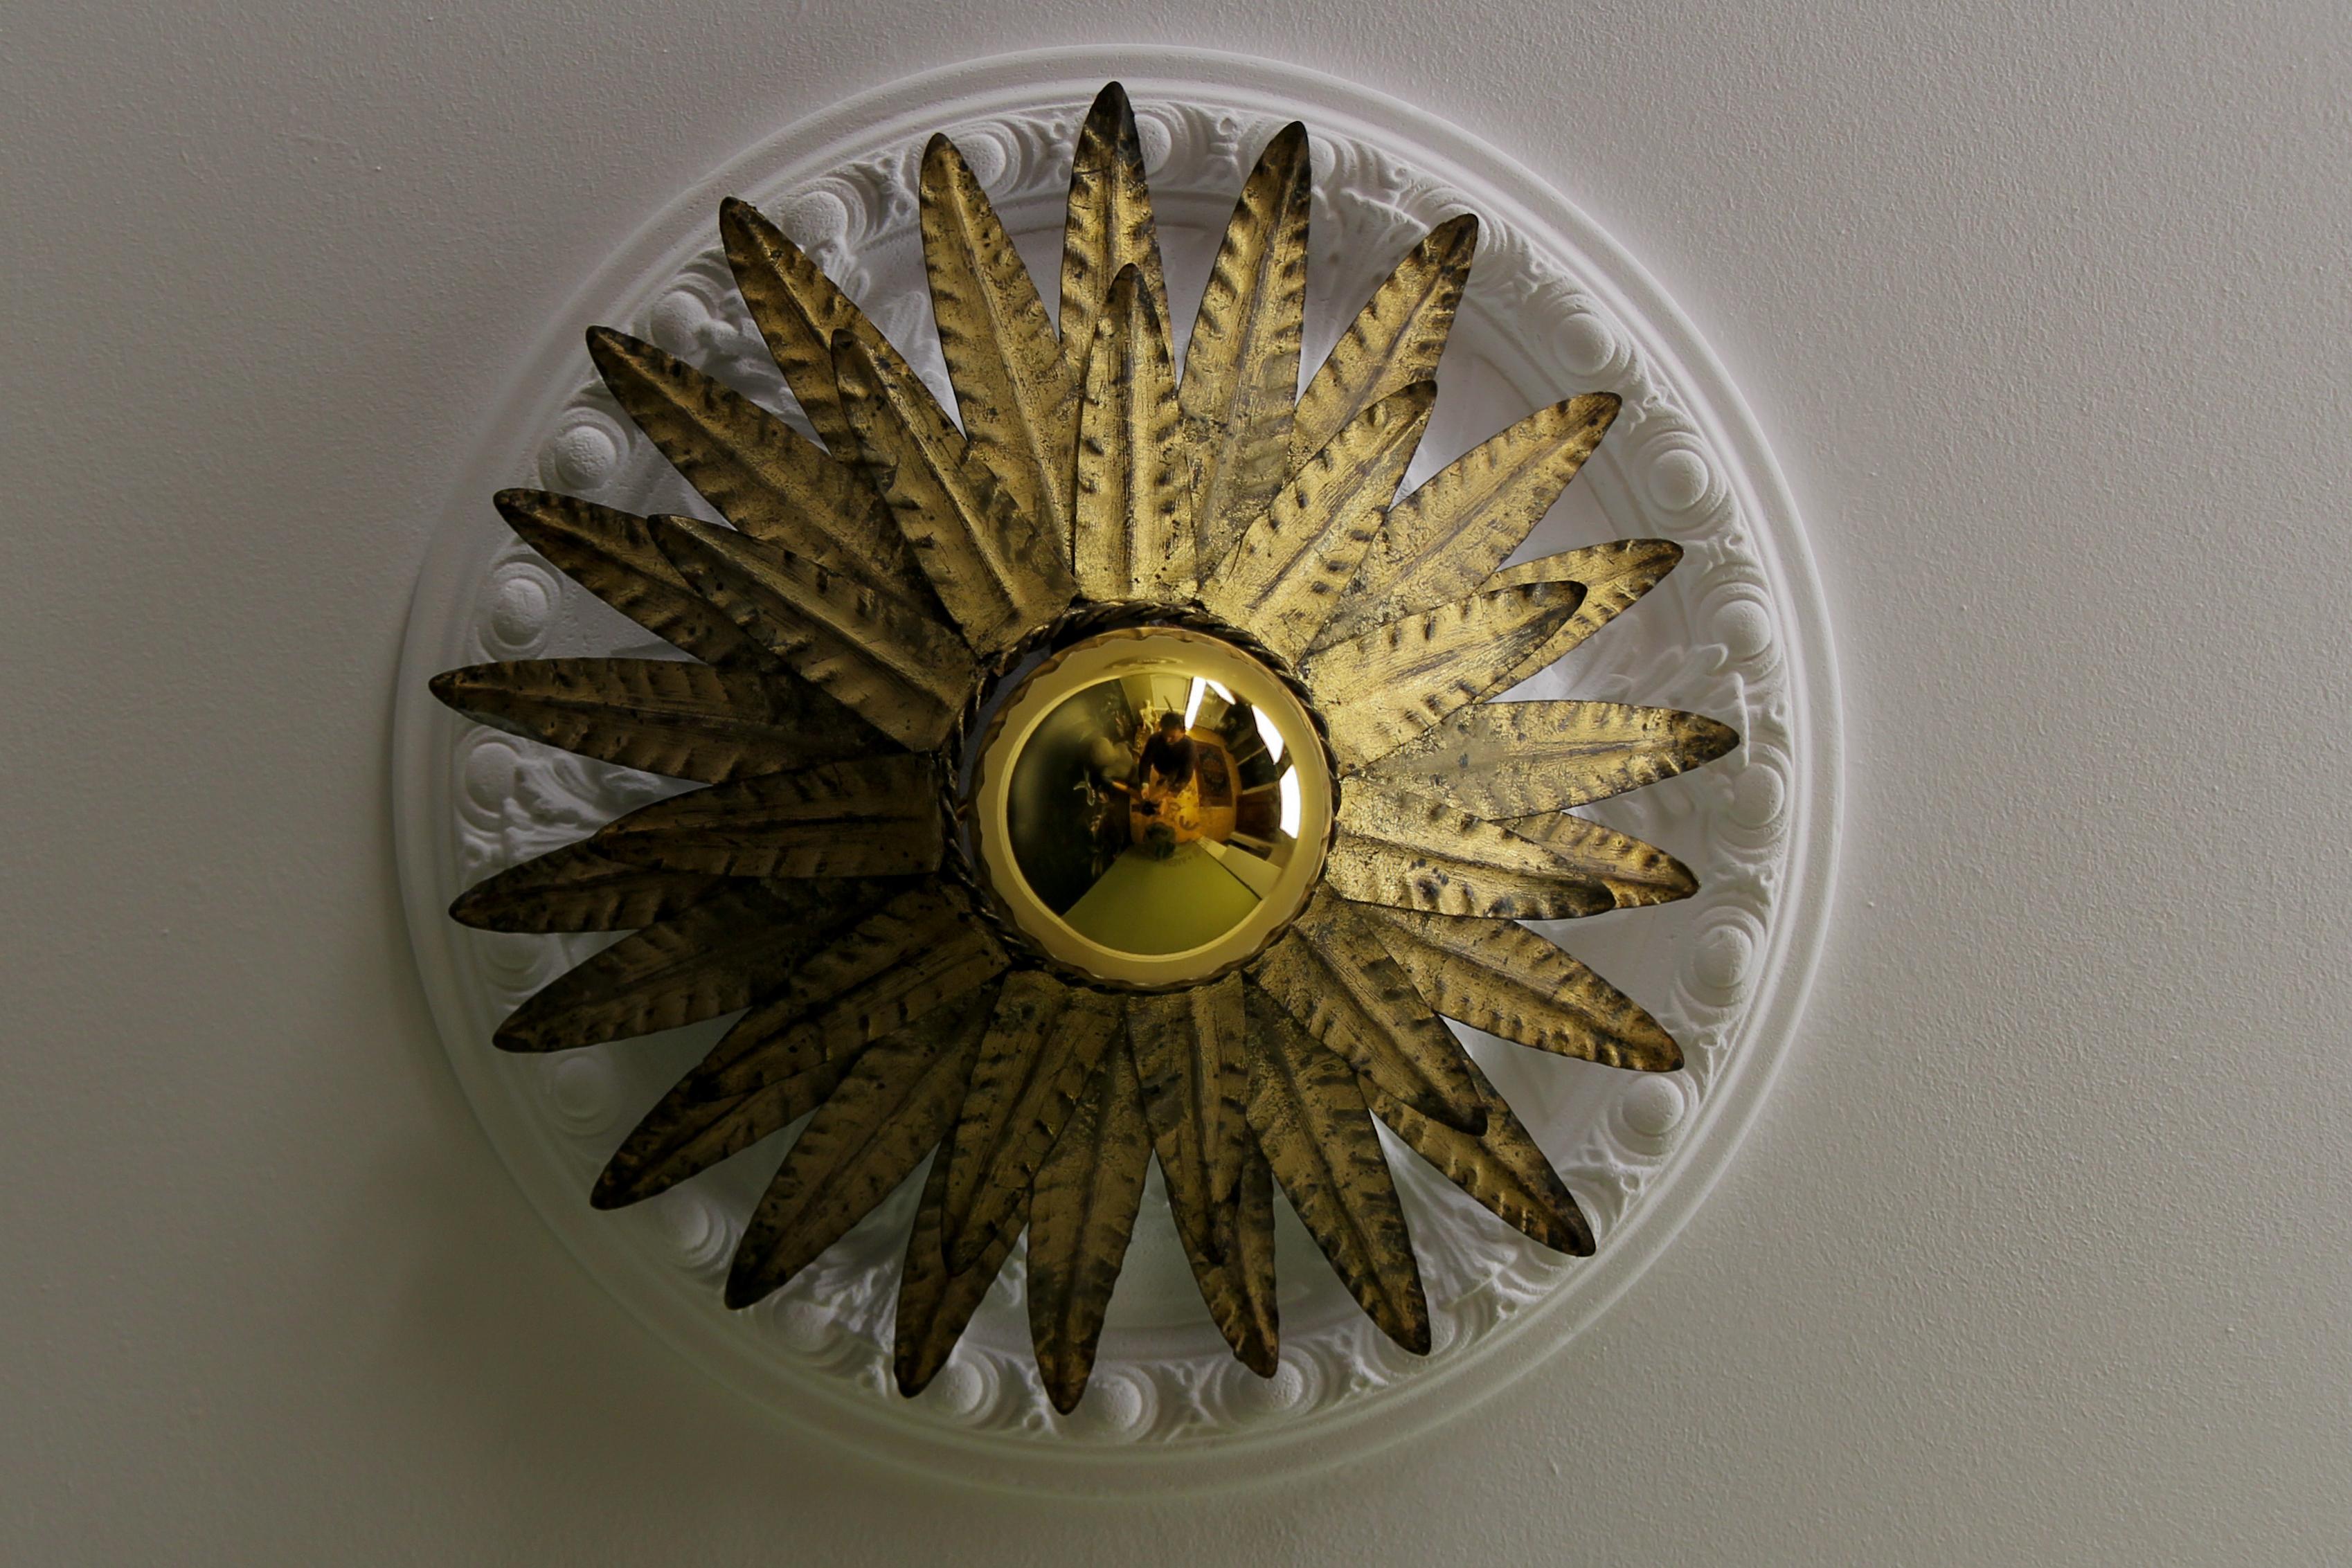 Hollywood Regency gilt metal sunburst-shaped crown ceiling light fixture, Spain, circa the 1960s.
This outstanding sunburst-shaped or crown-shaped ceiling light features two layers of gilt metal leaves surrounding the central exposed bulb.
This